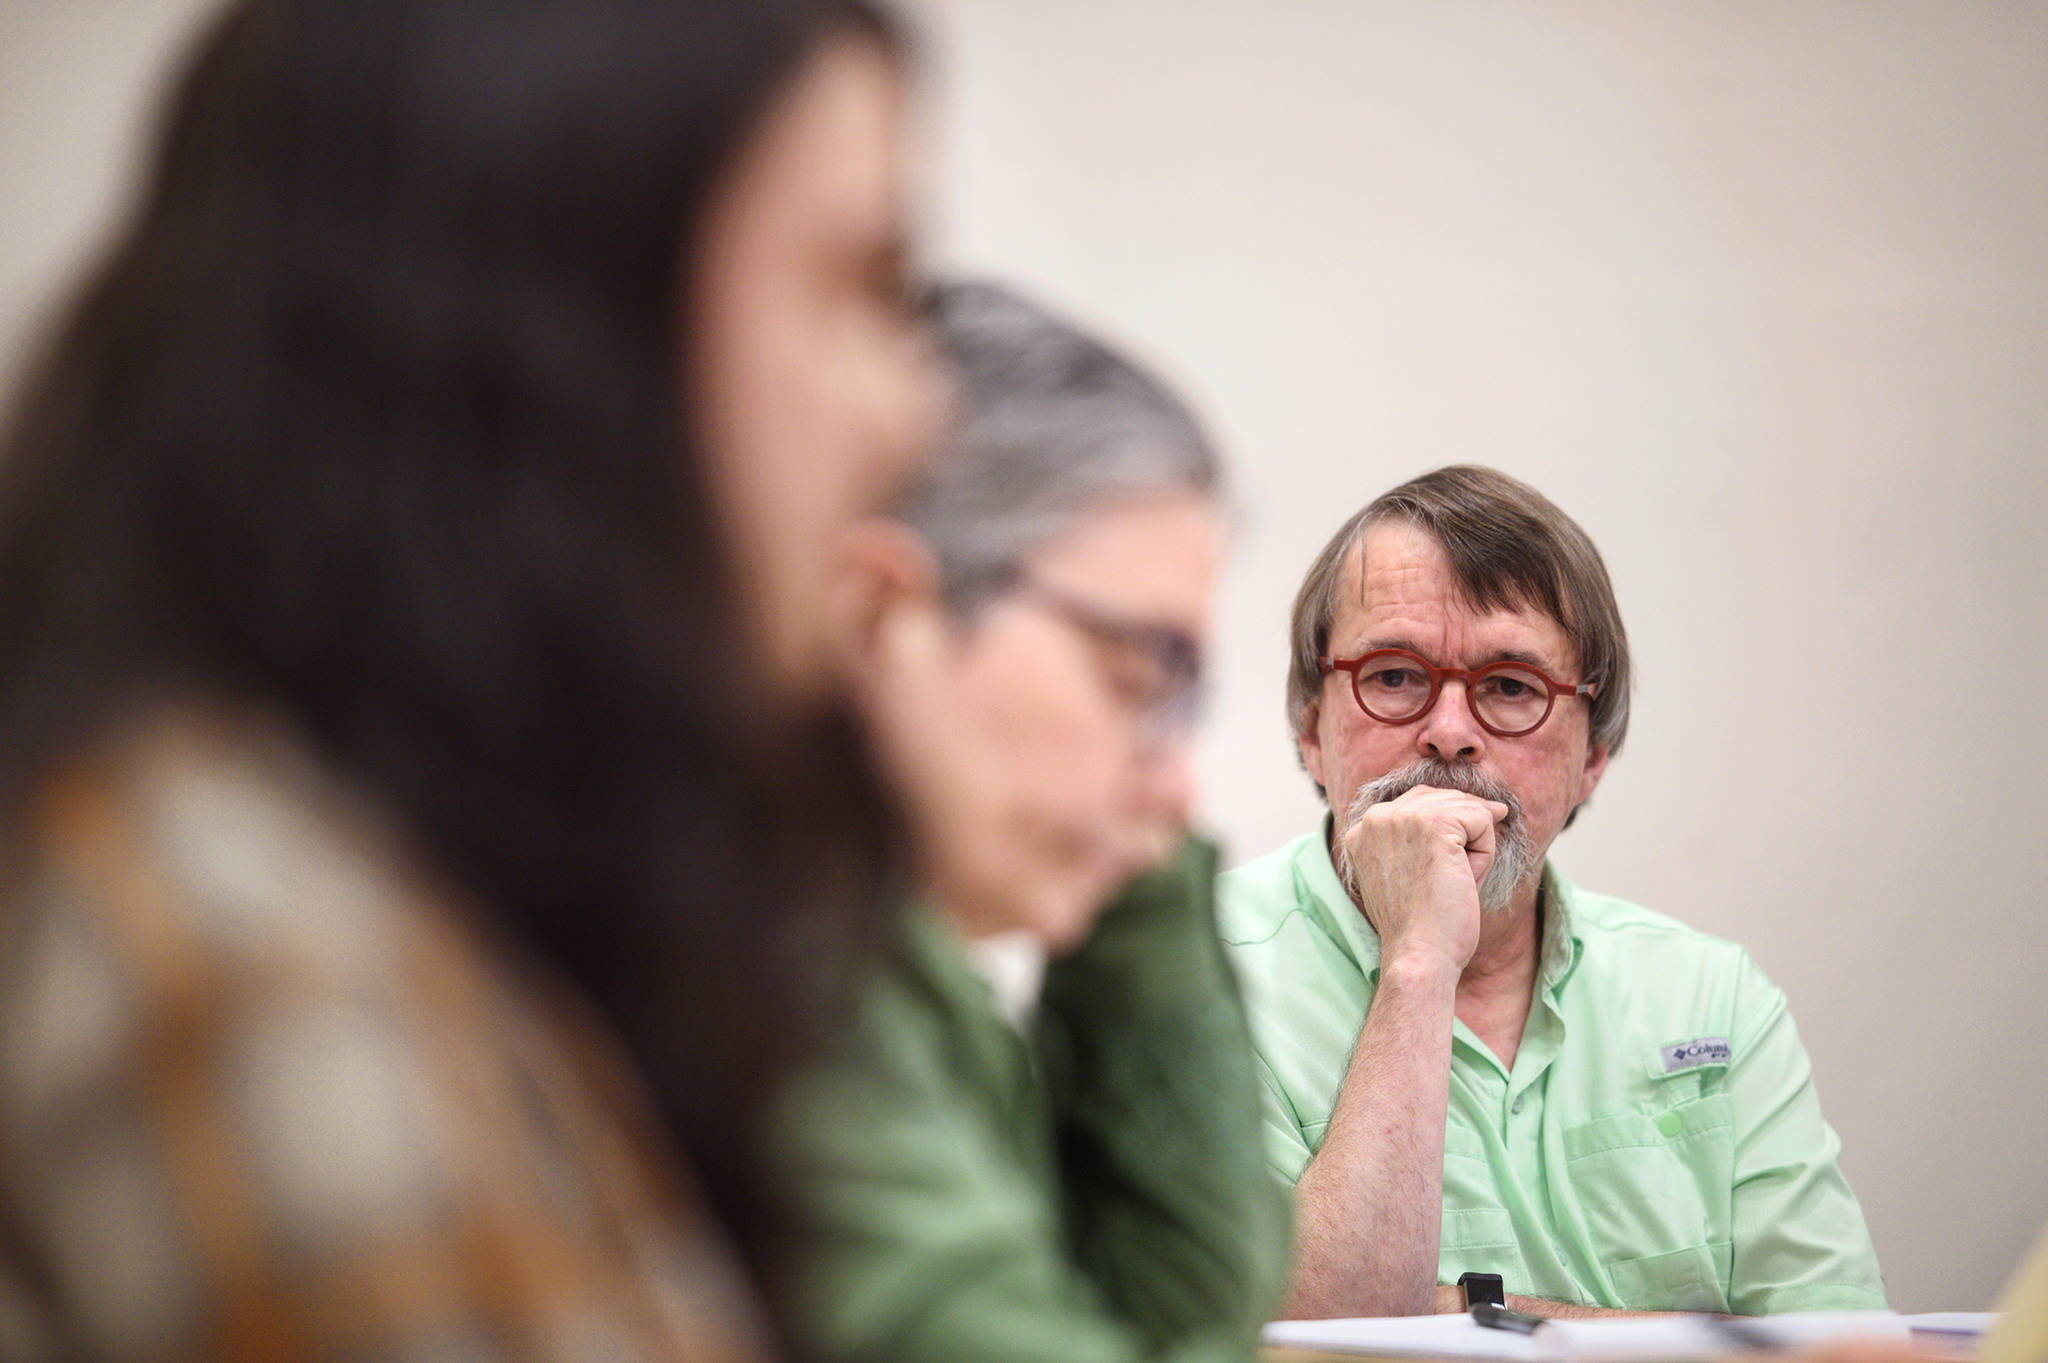 KTOO President and General Manager Bill Legere watches public testimony at the public radio station’s board meeting in September of 2018. Current and former station employees expressed concerns about newsroom atmosphere and what they felt was unfair treatment by upper management. (Michael Penn / Juneau Empire File)